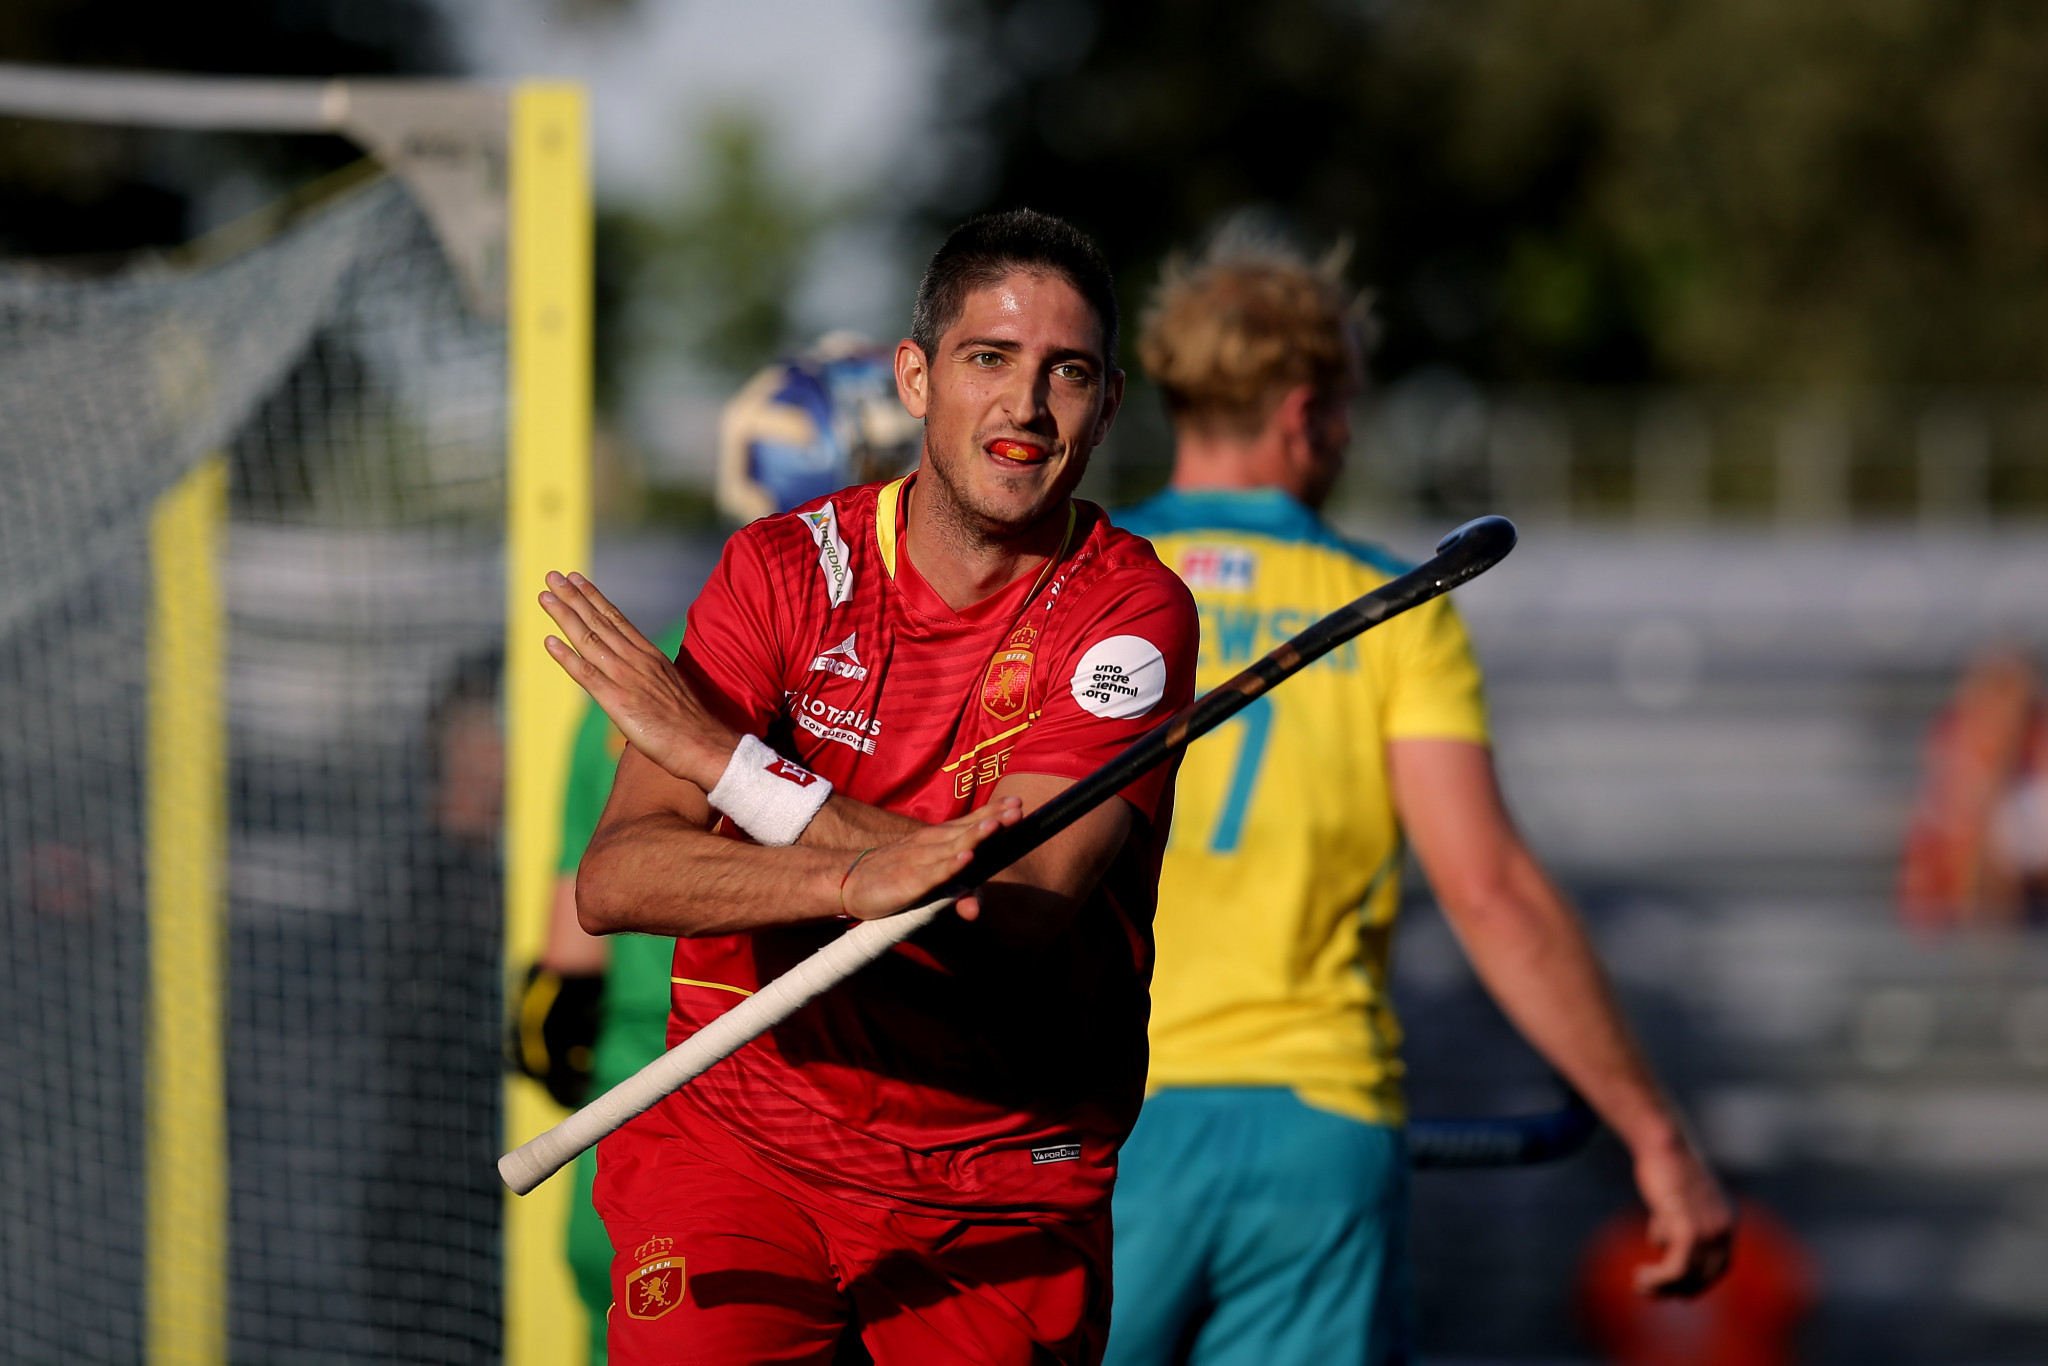 Spain beat Australia to record their first outright win of the men's International Hockey Federation Pro League ©Getty Images